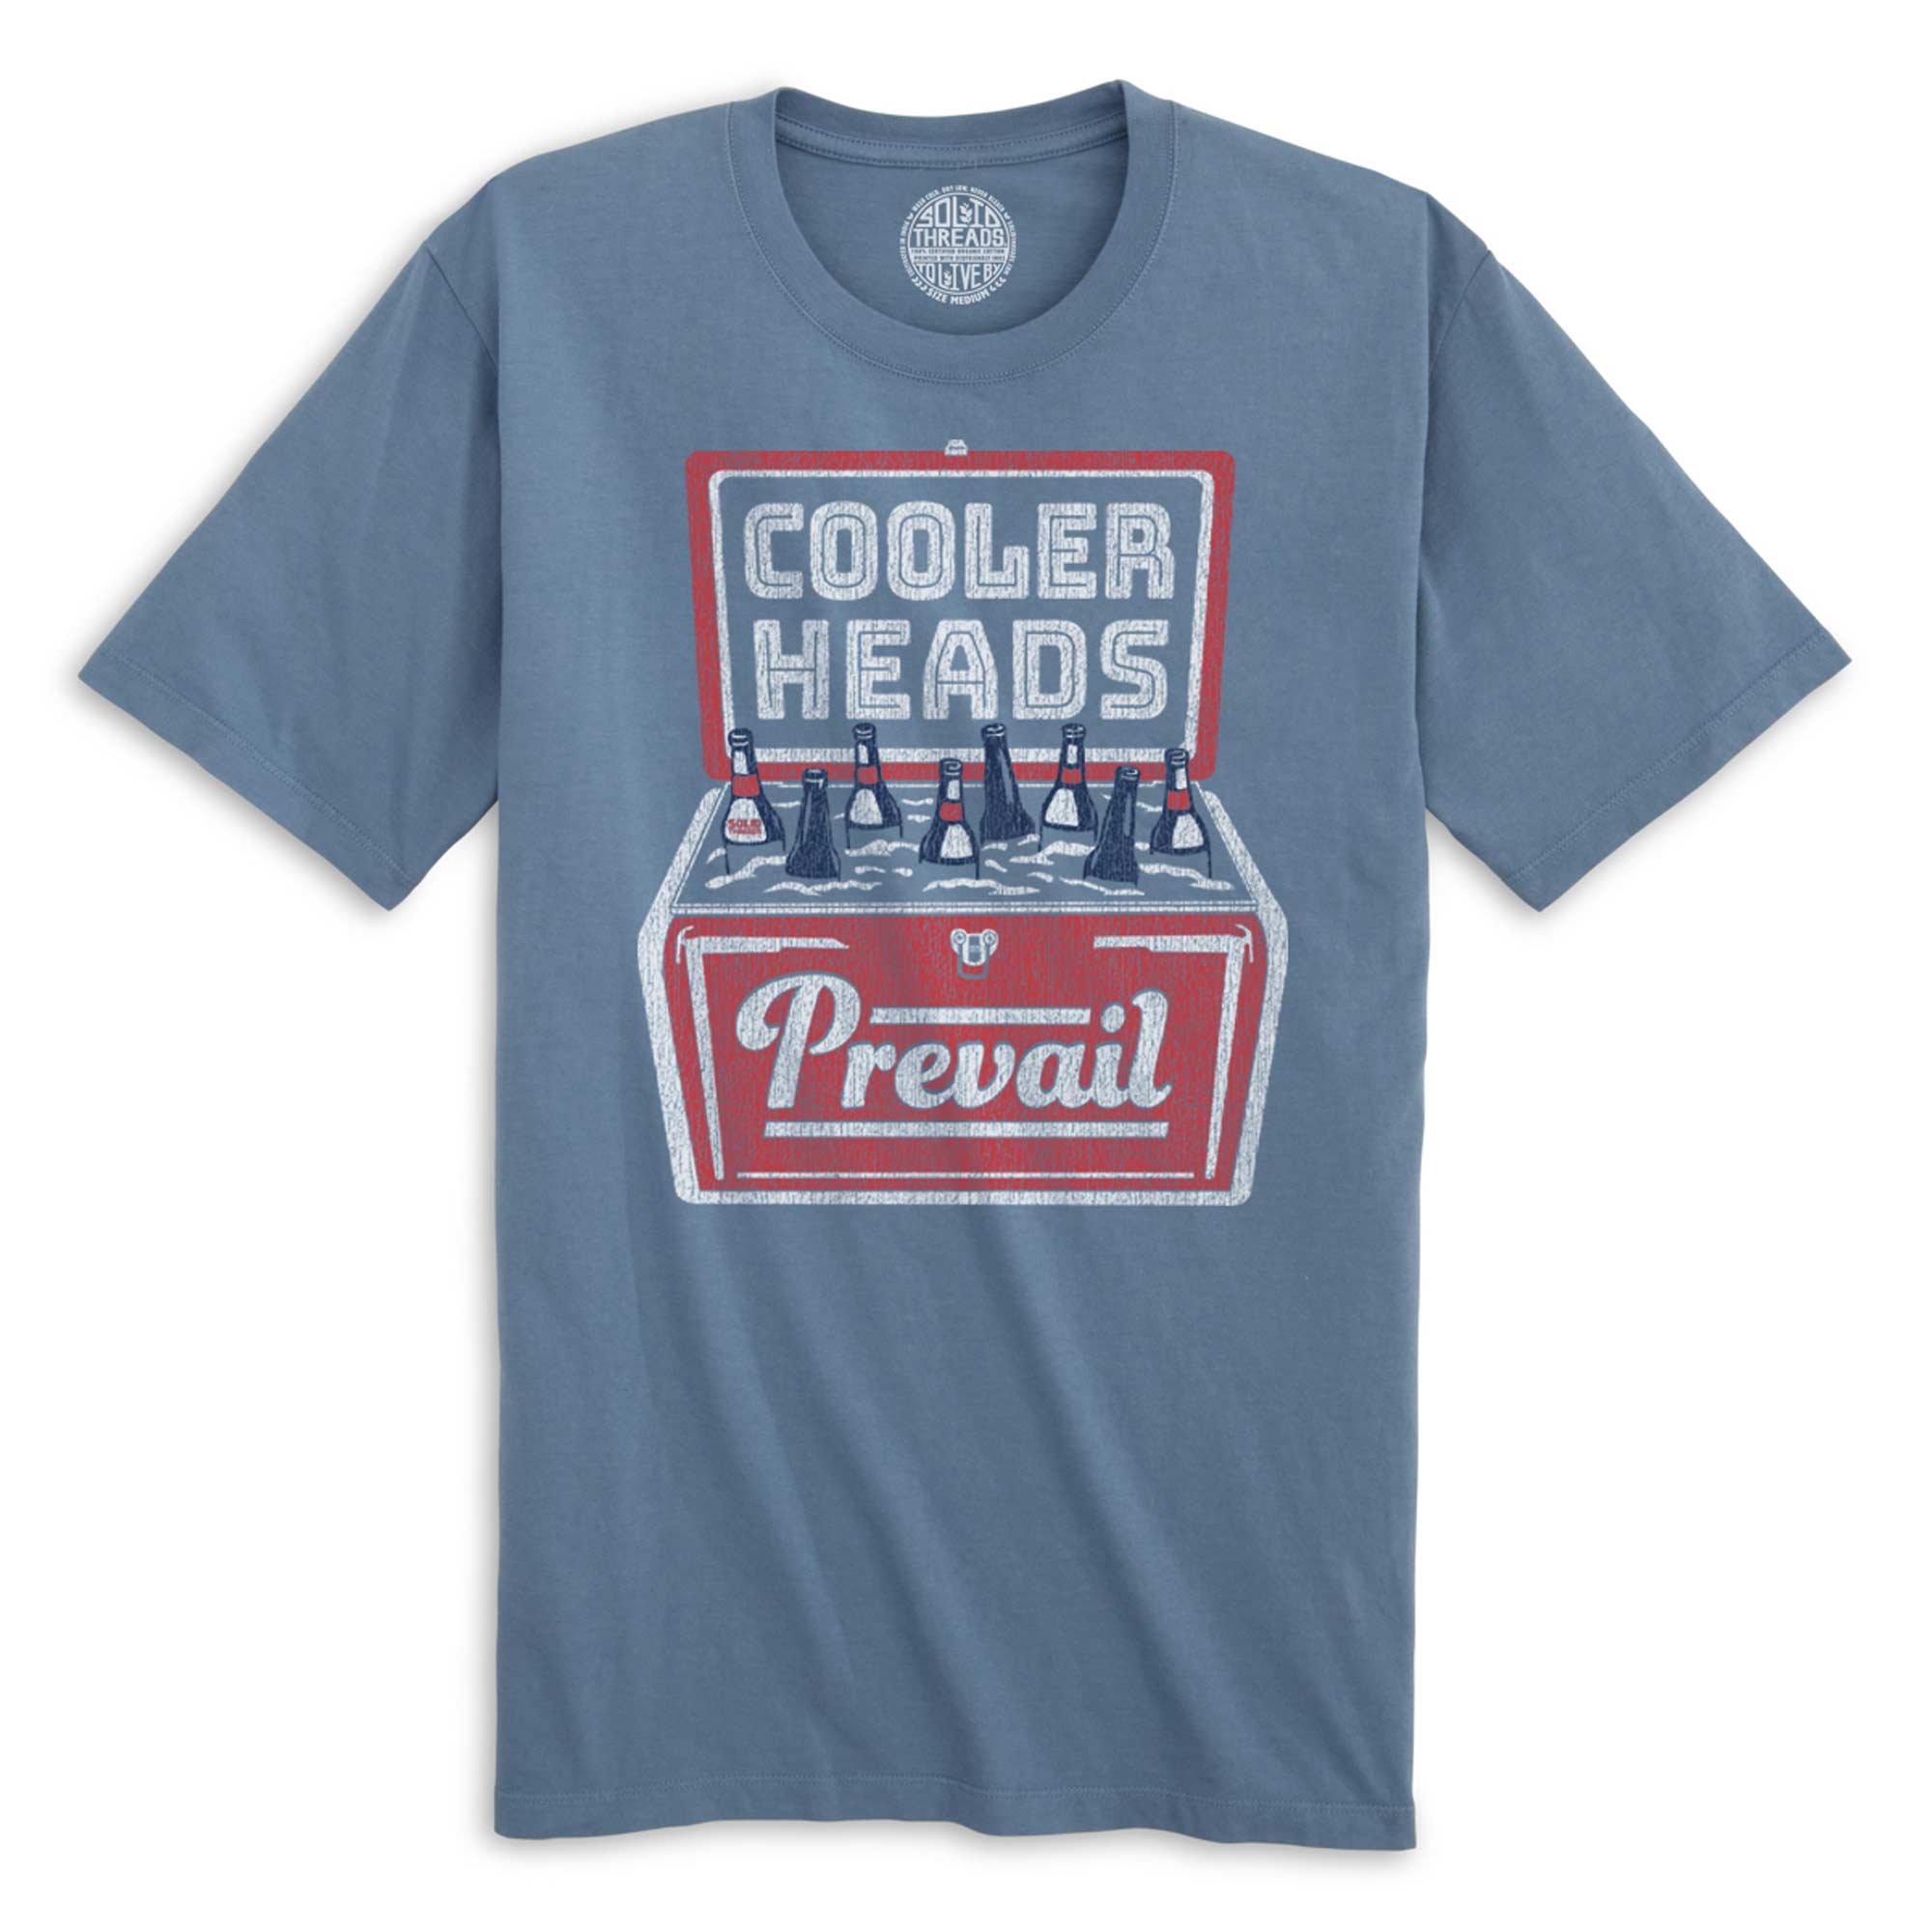 Cooler Heads Vintage Organic Cotton T-shirt | Funny Drinking   Tee | Solid Threads